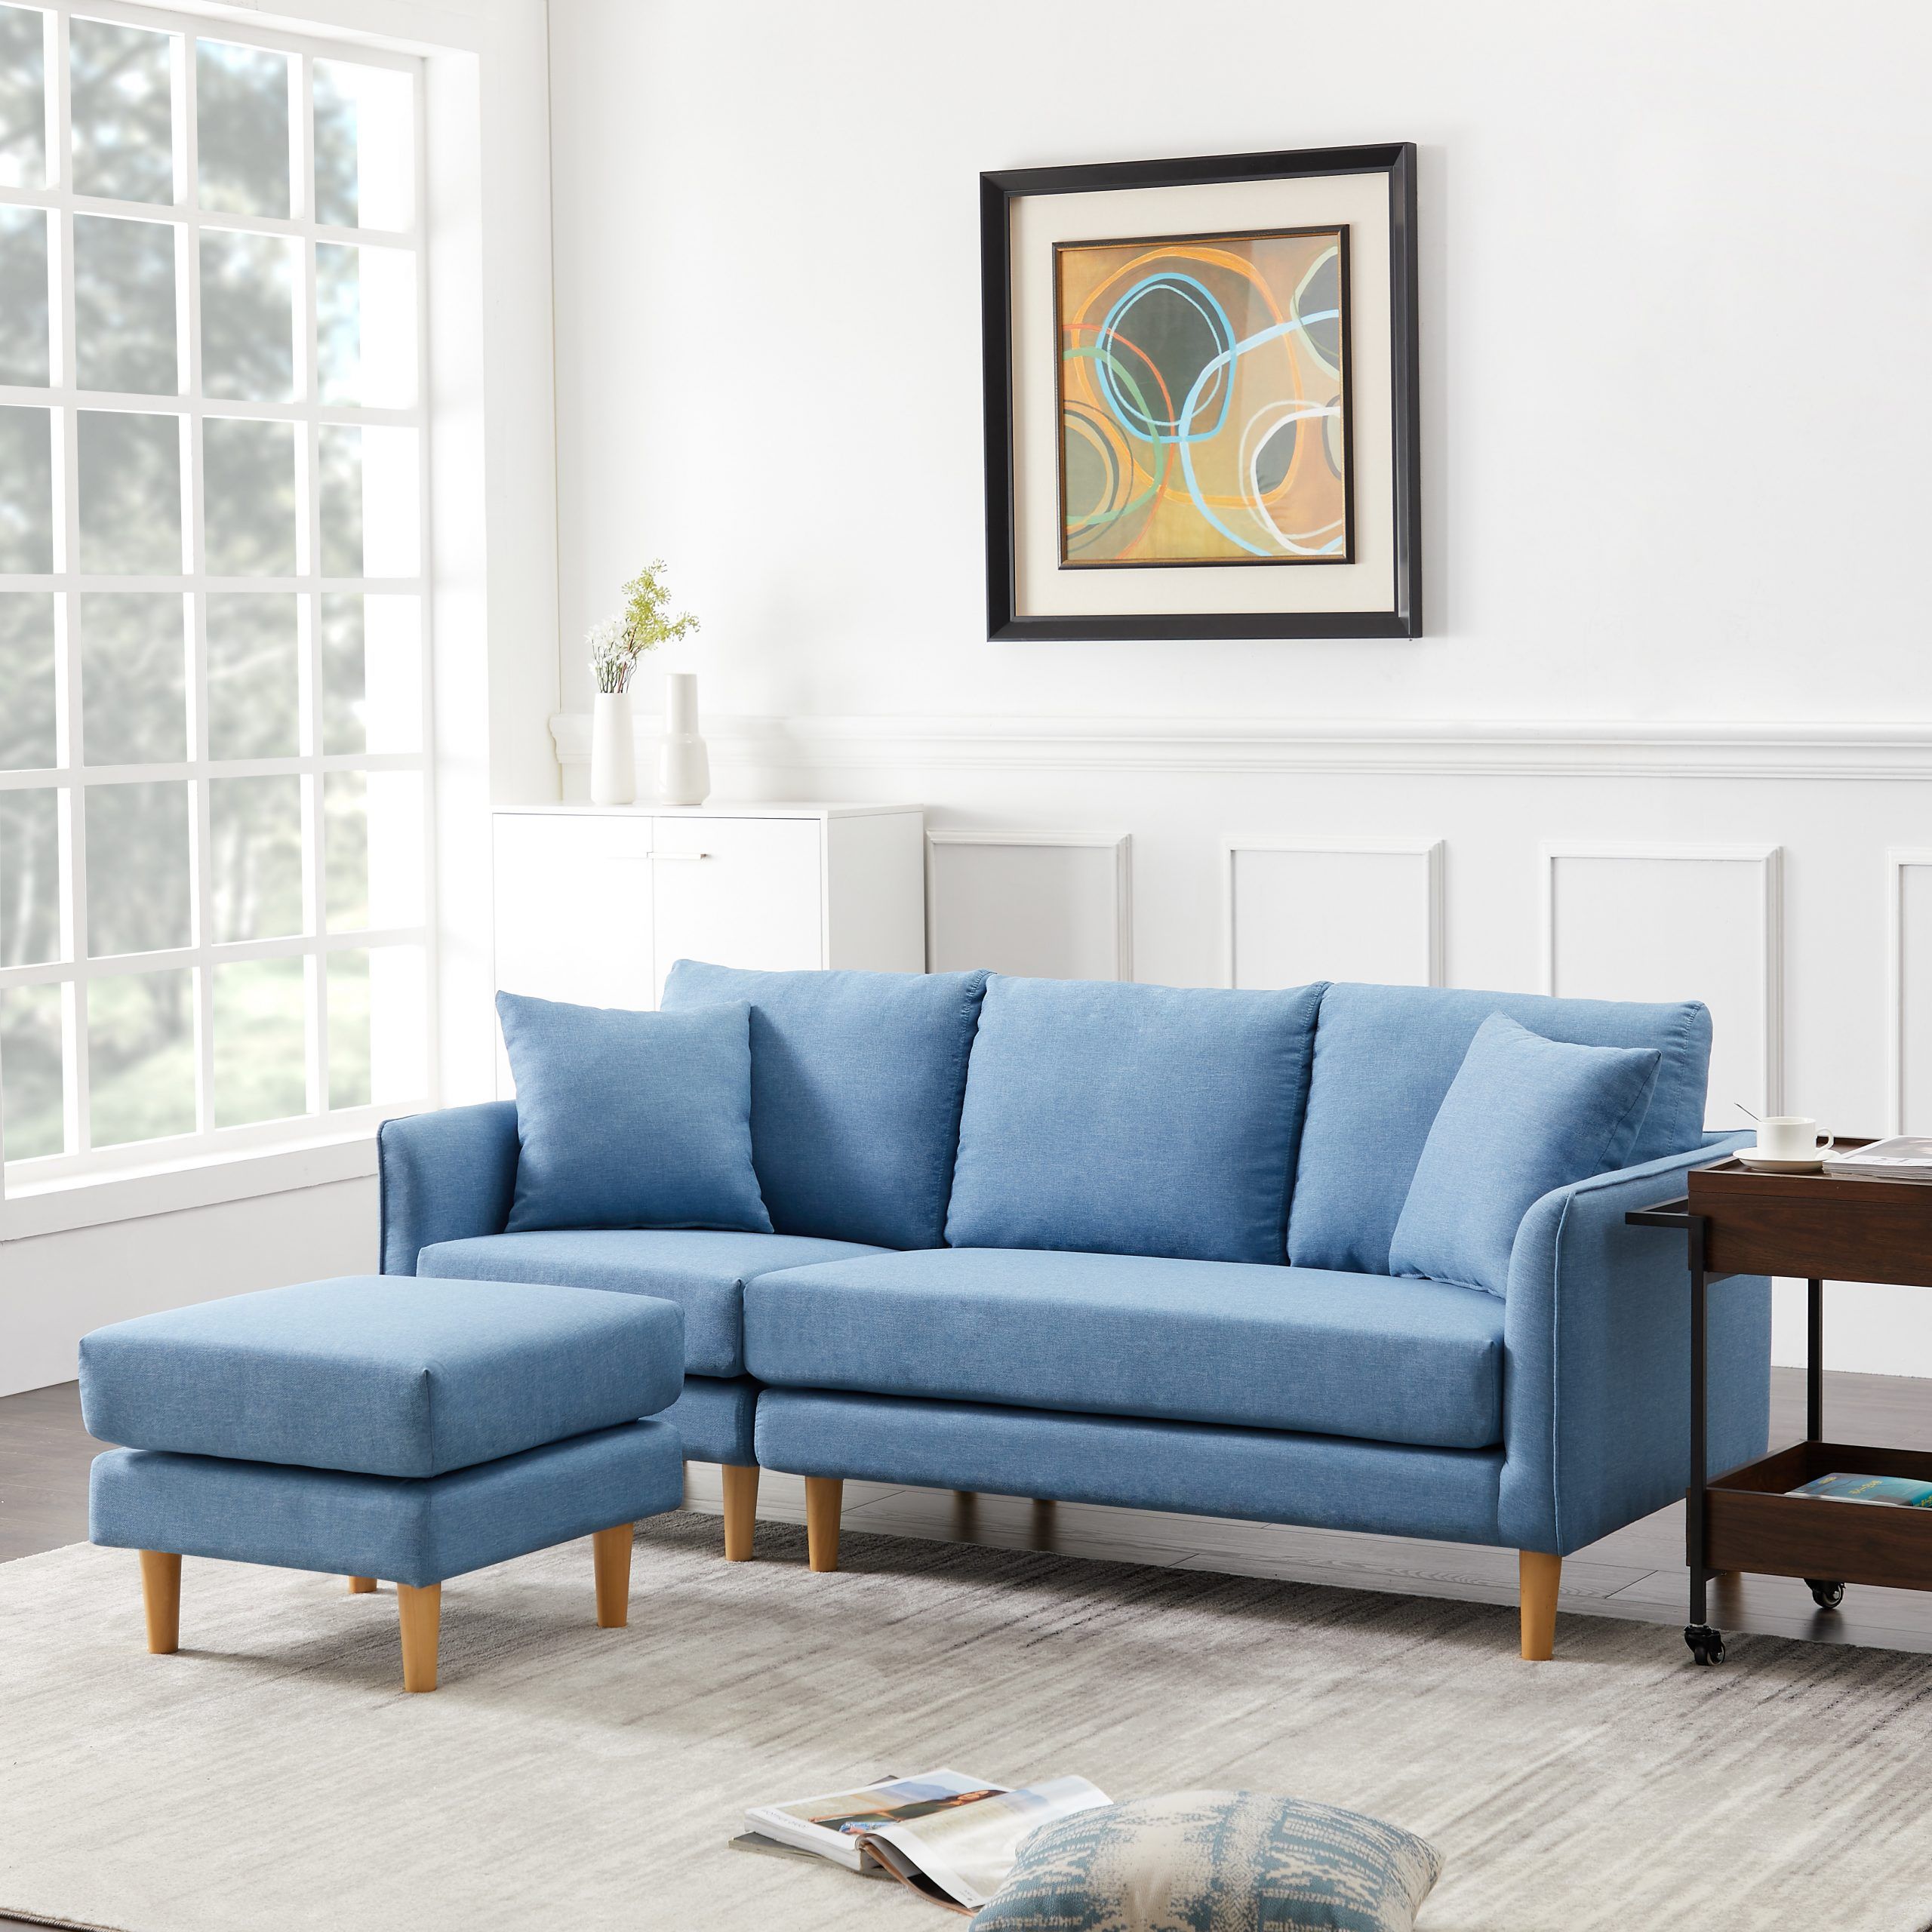 Urhomepro Reversible Sectional Sofa Couch, Modern 3 Seat In Most Popular Dove Mid Century Sectional Sofas Dark Blue (View 7 of 25)